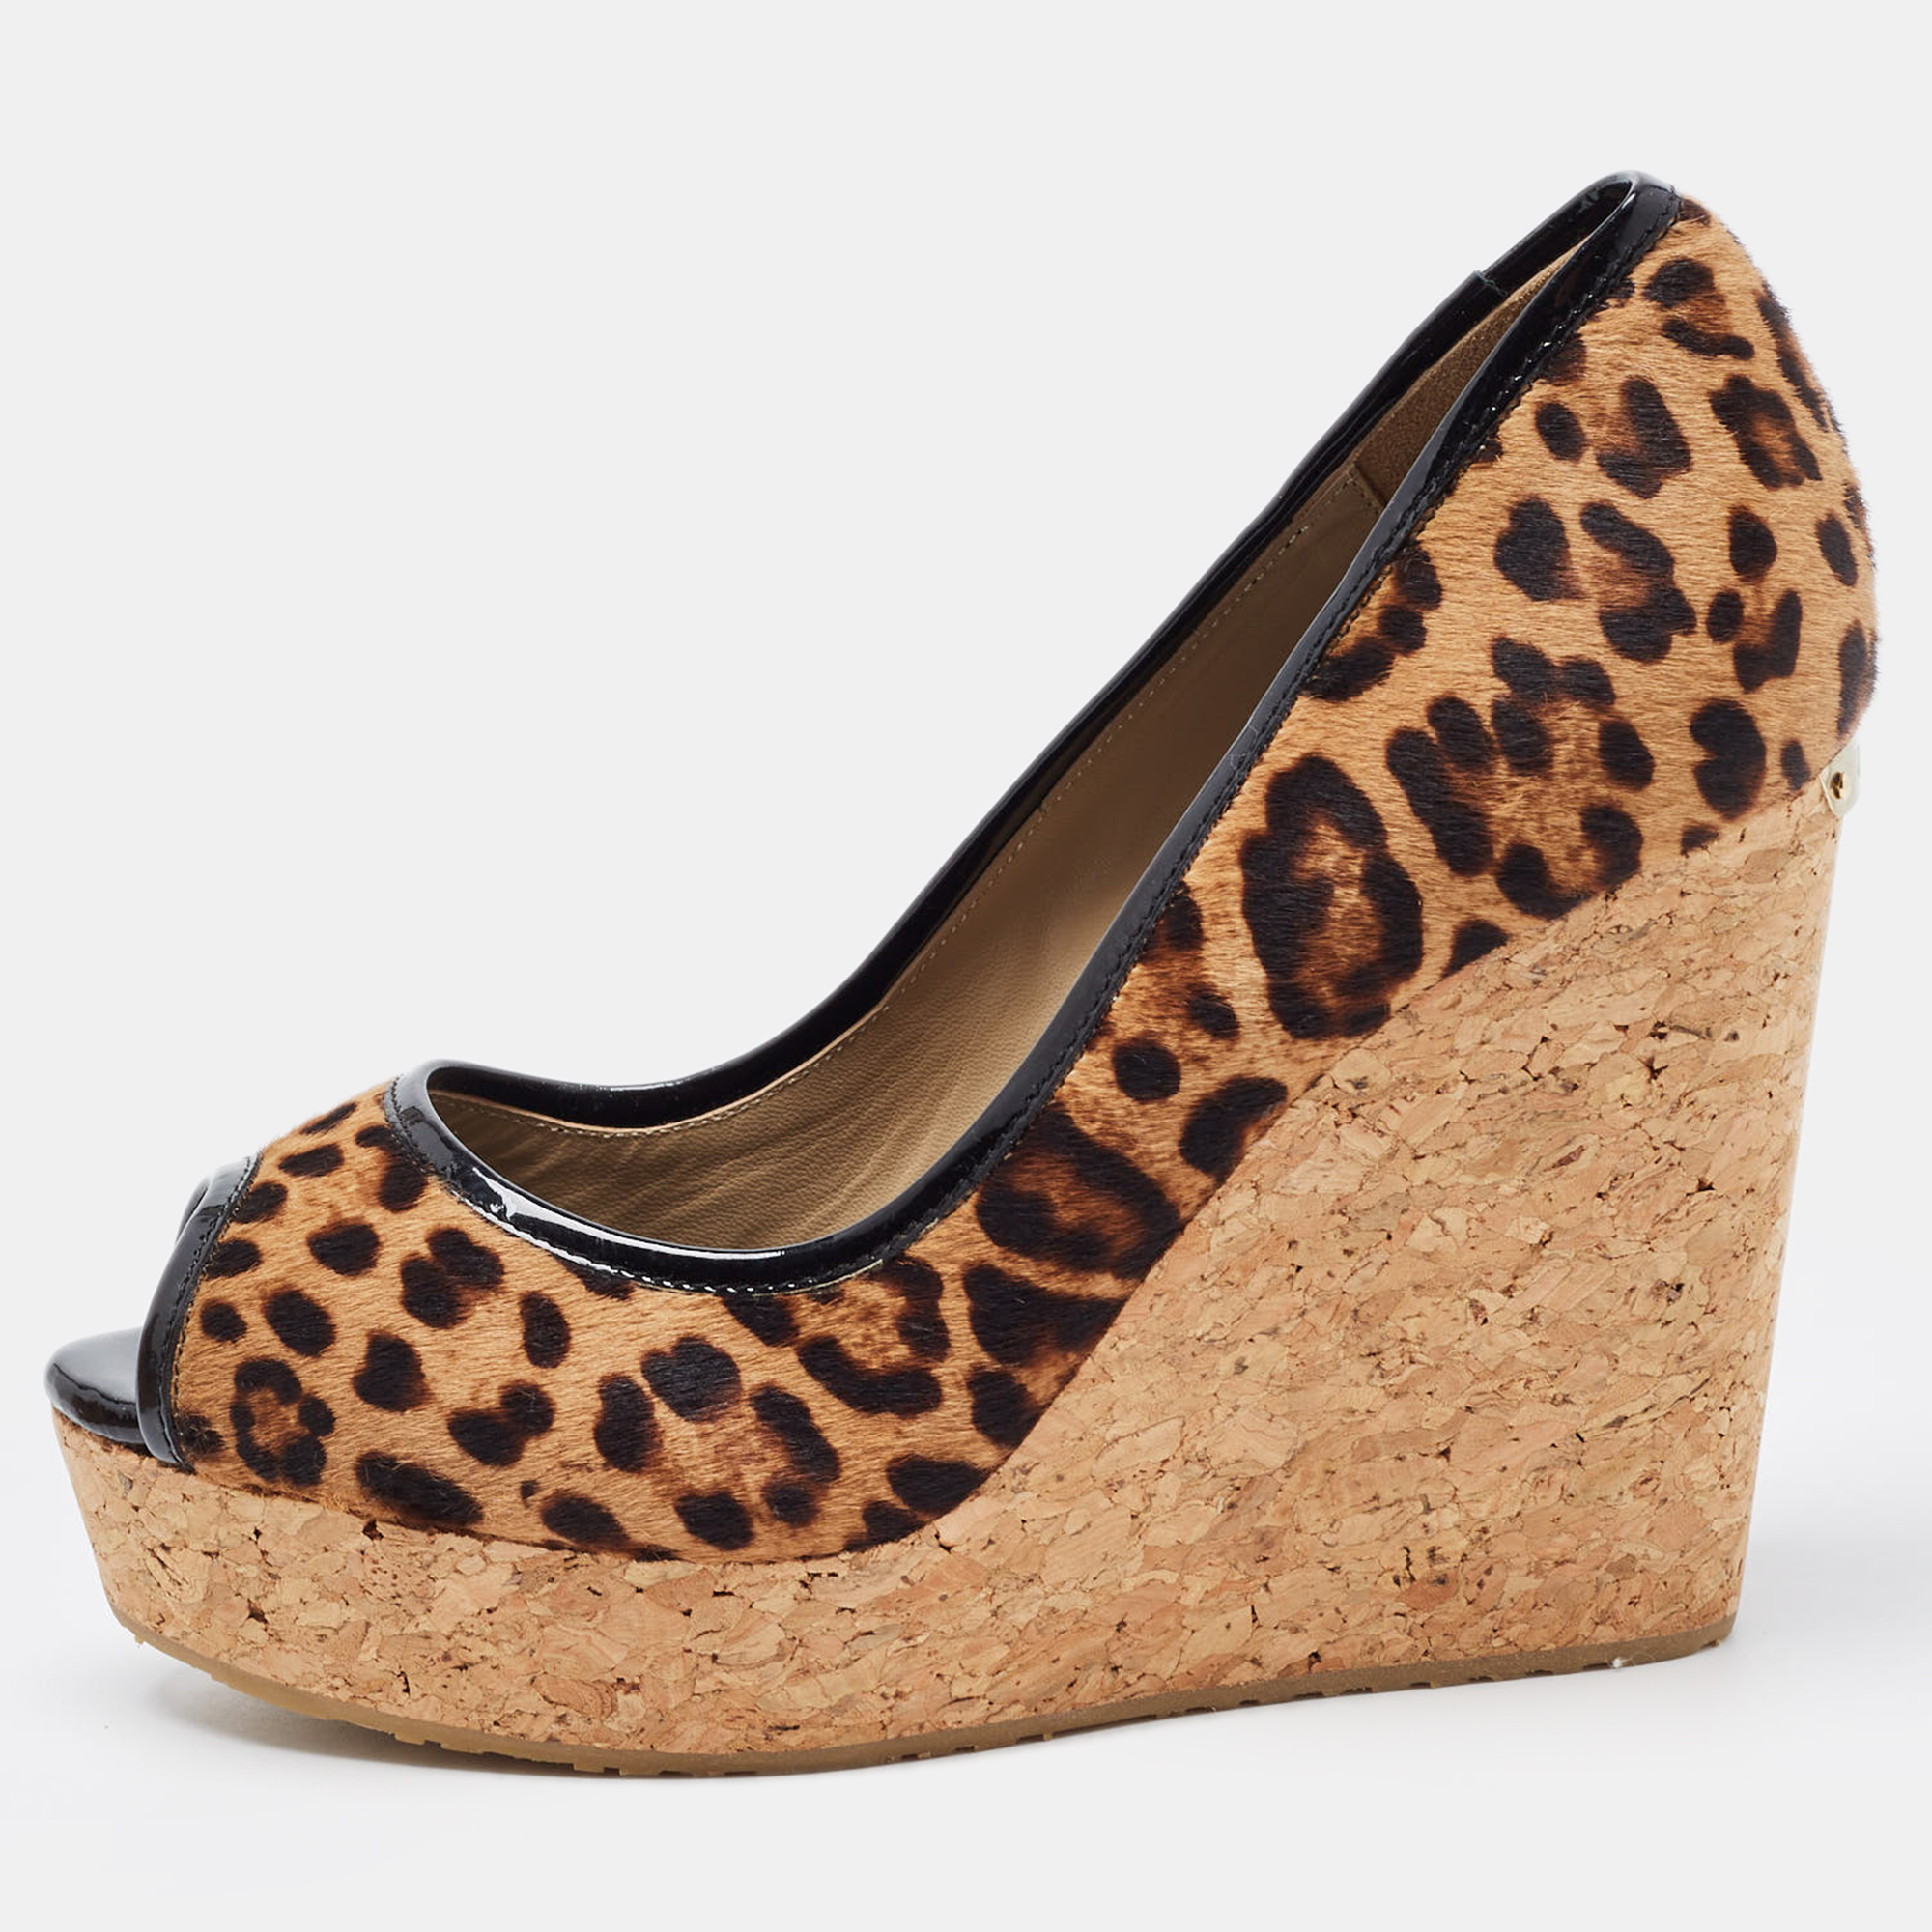 Make a chic style statement with these Jimmy Choo wedge pumps. They showcase sturdy heels and durable soles perfect for your fashionable outings